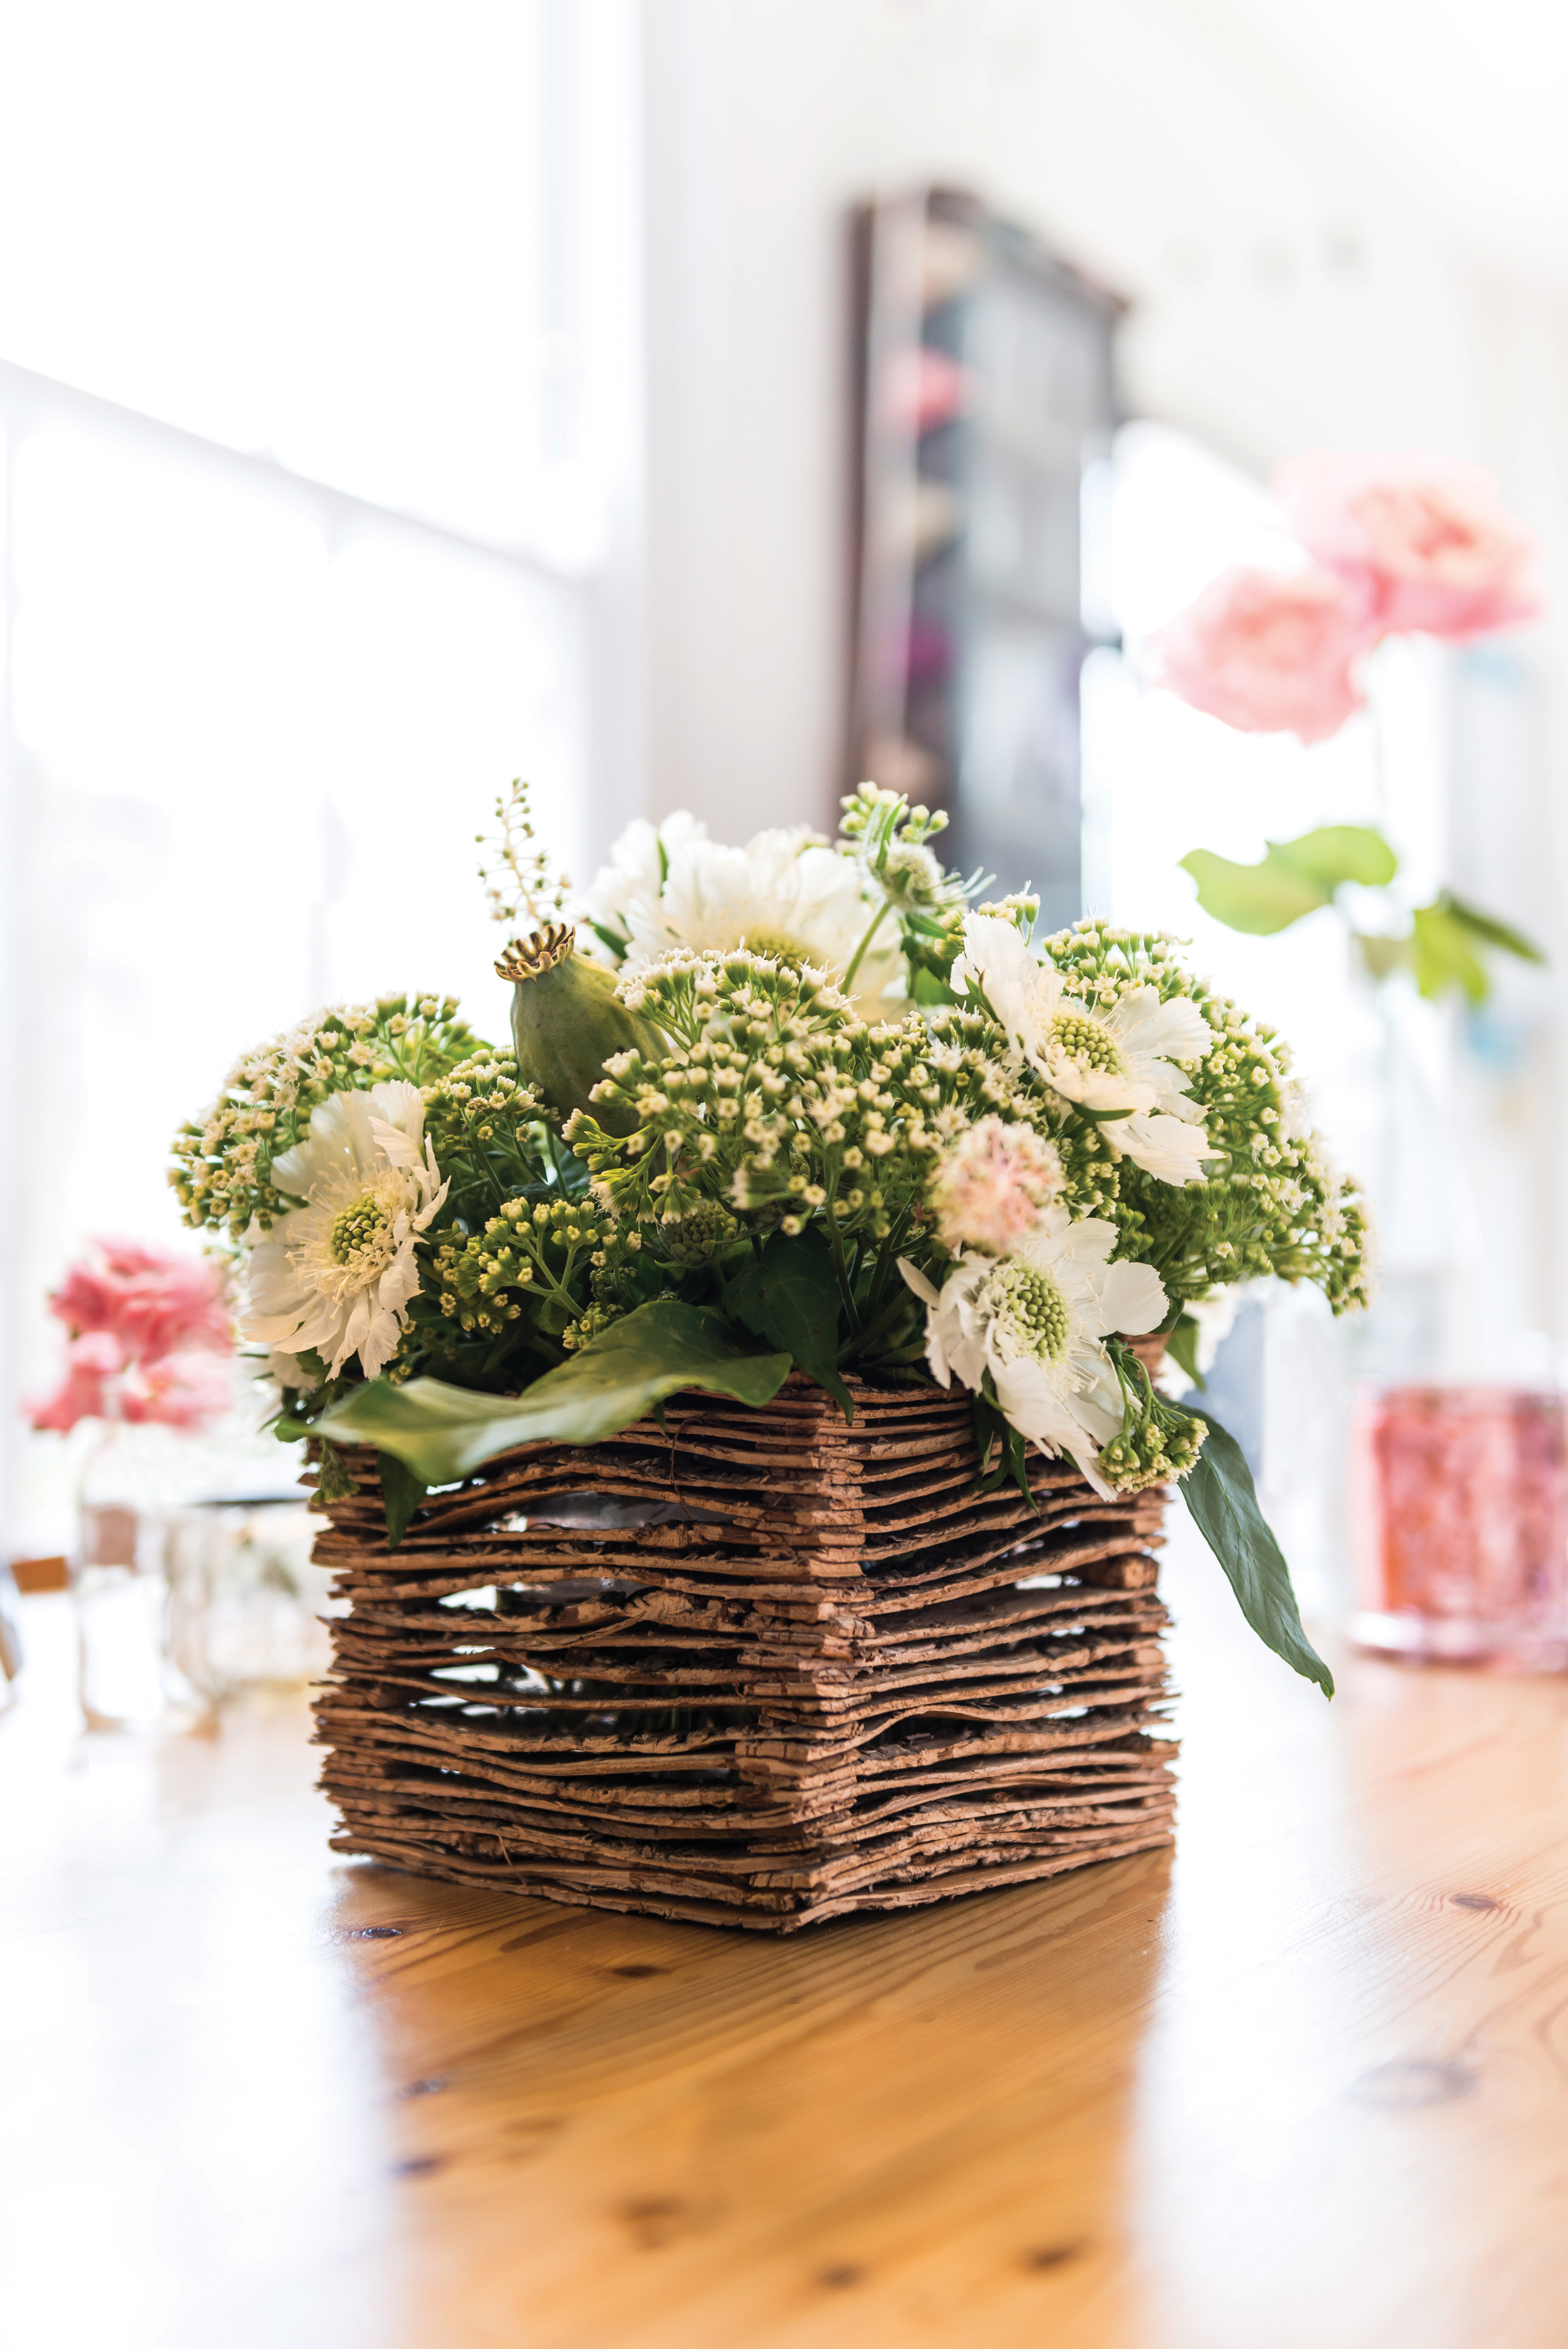 How to make a floral centerpiece